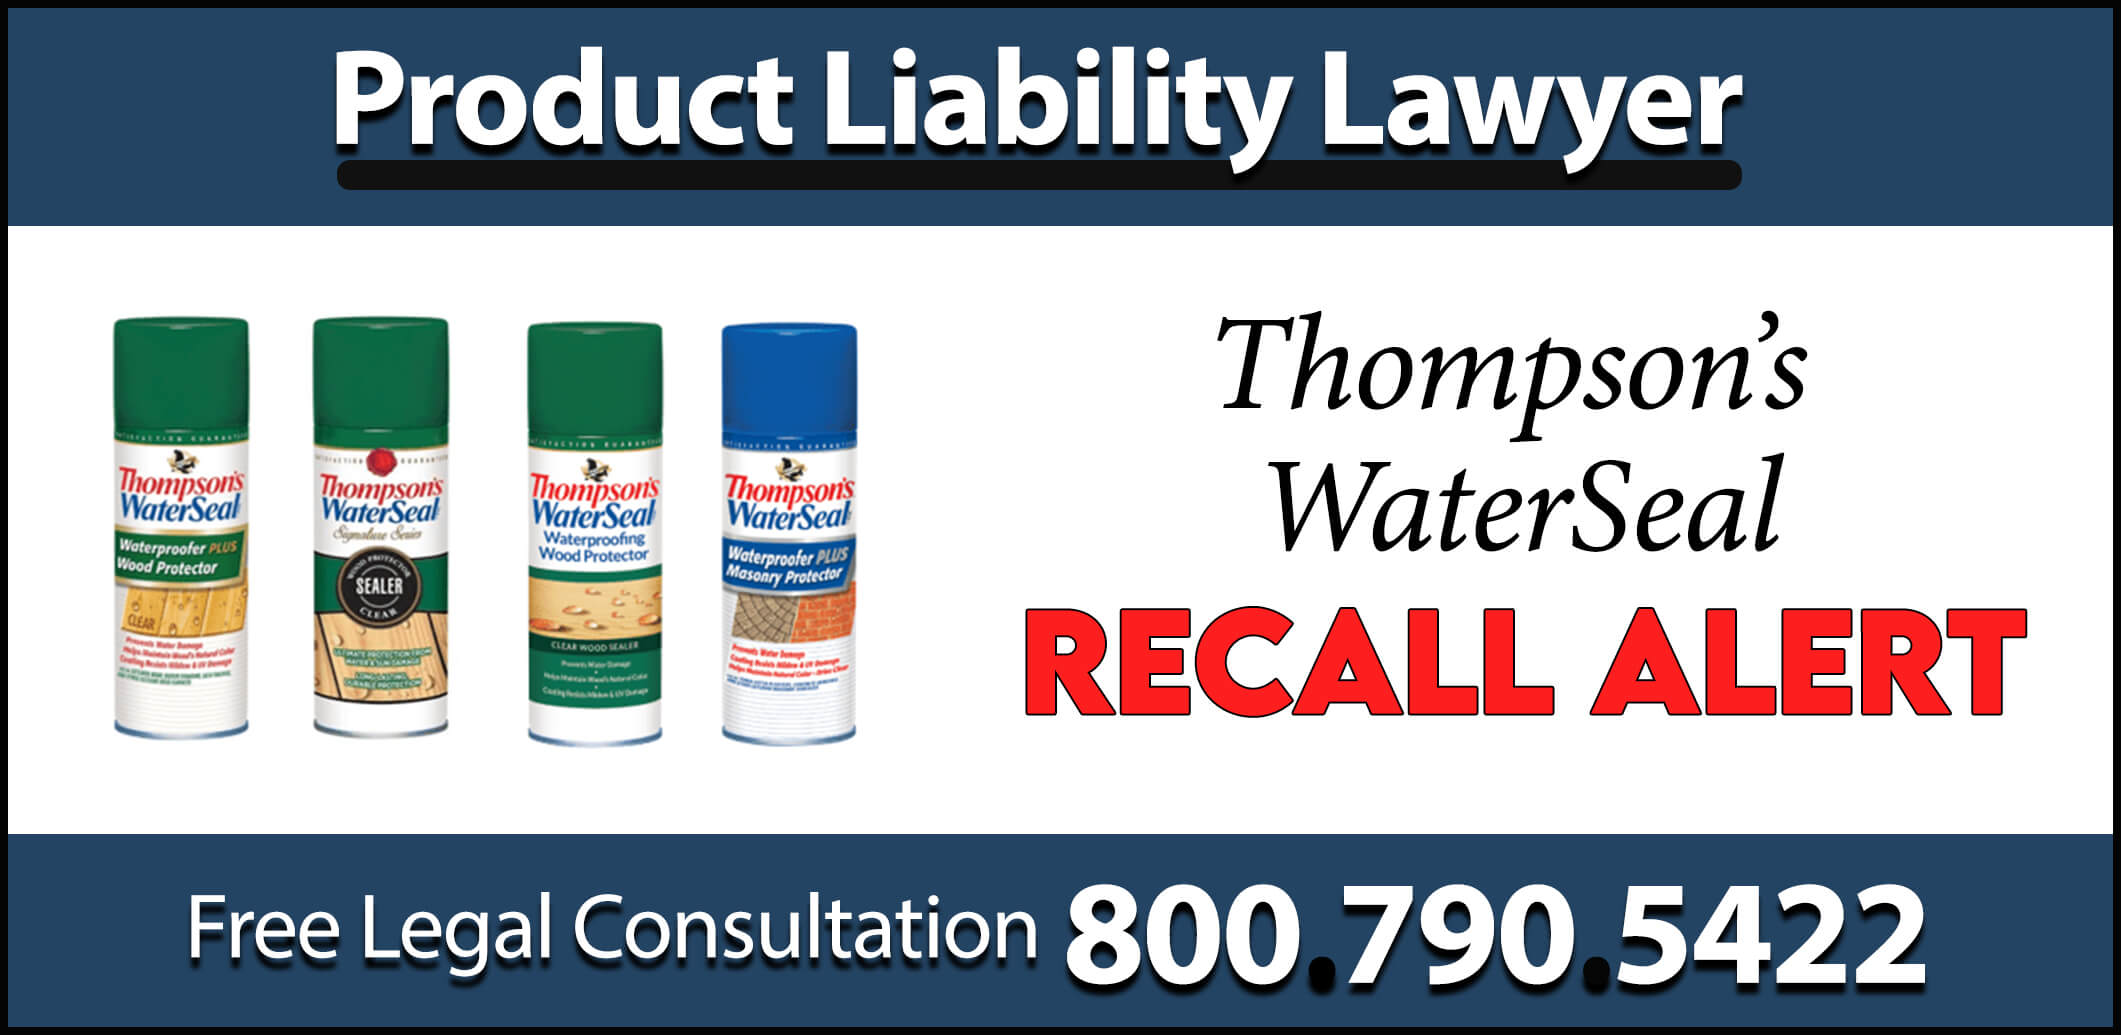 Thompsons waterseal aerosol cans recall alert product liability lawyer leak design error fire hazard medical expenses property damage compensation sue.